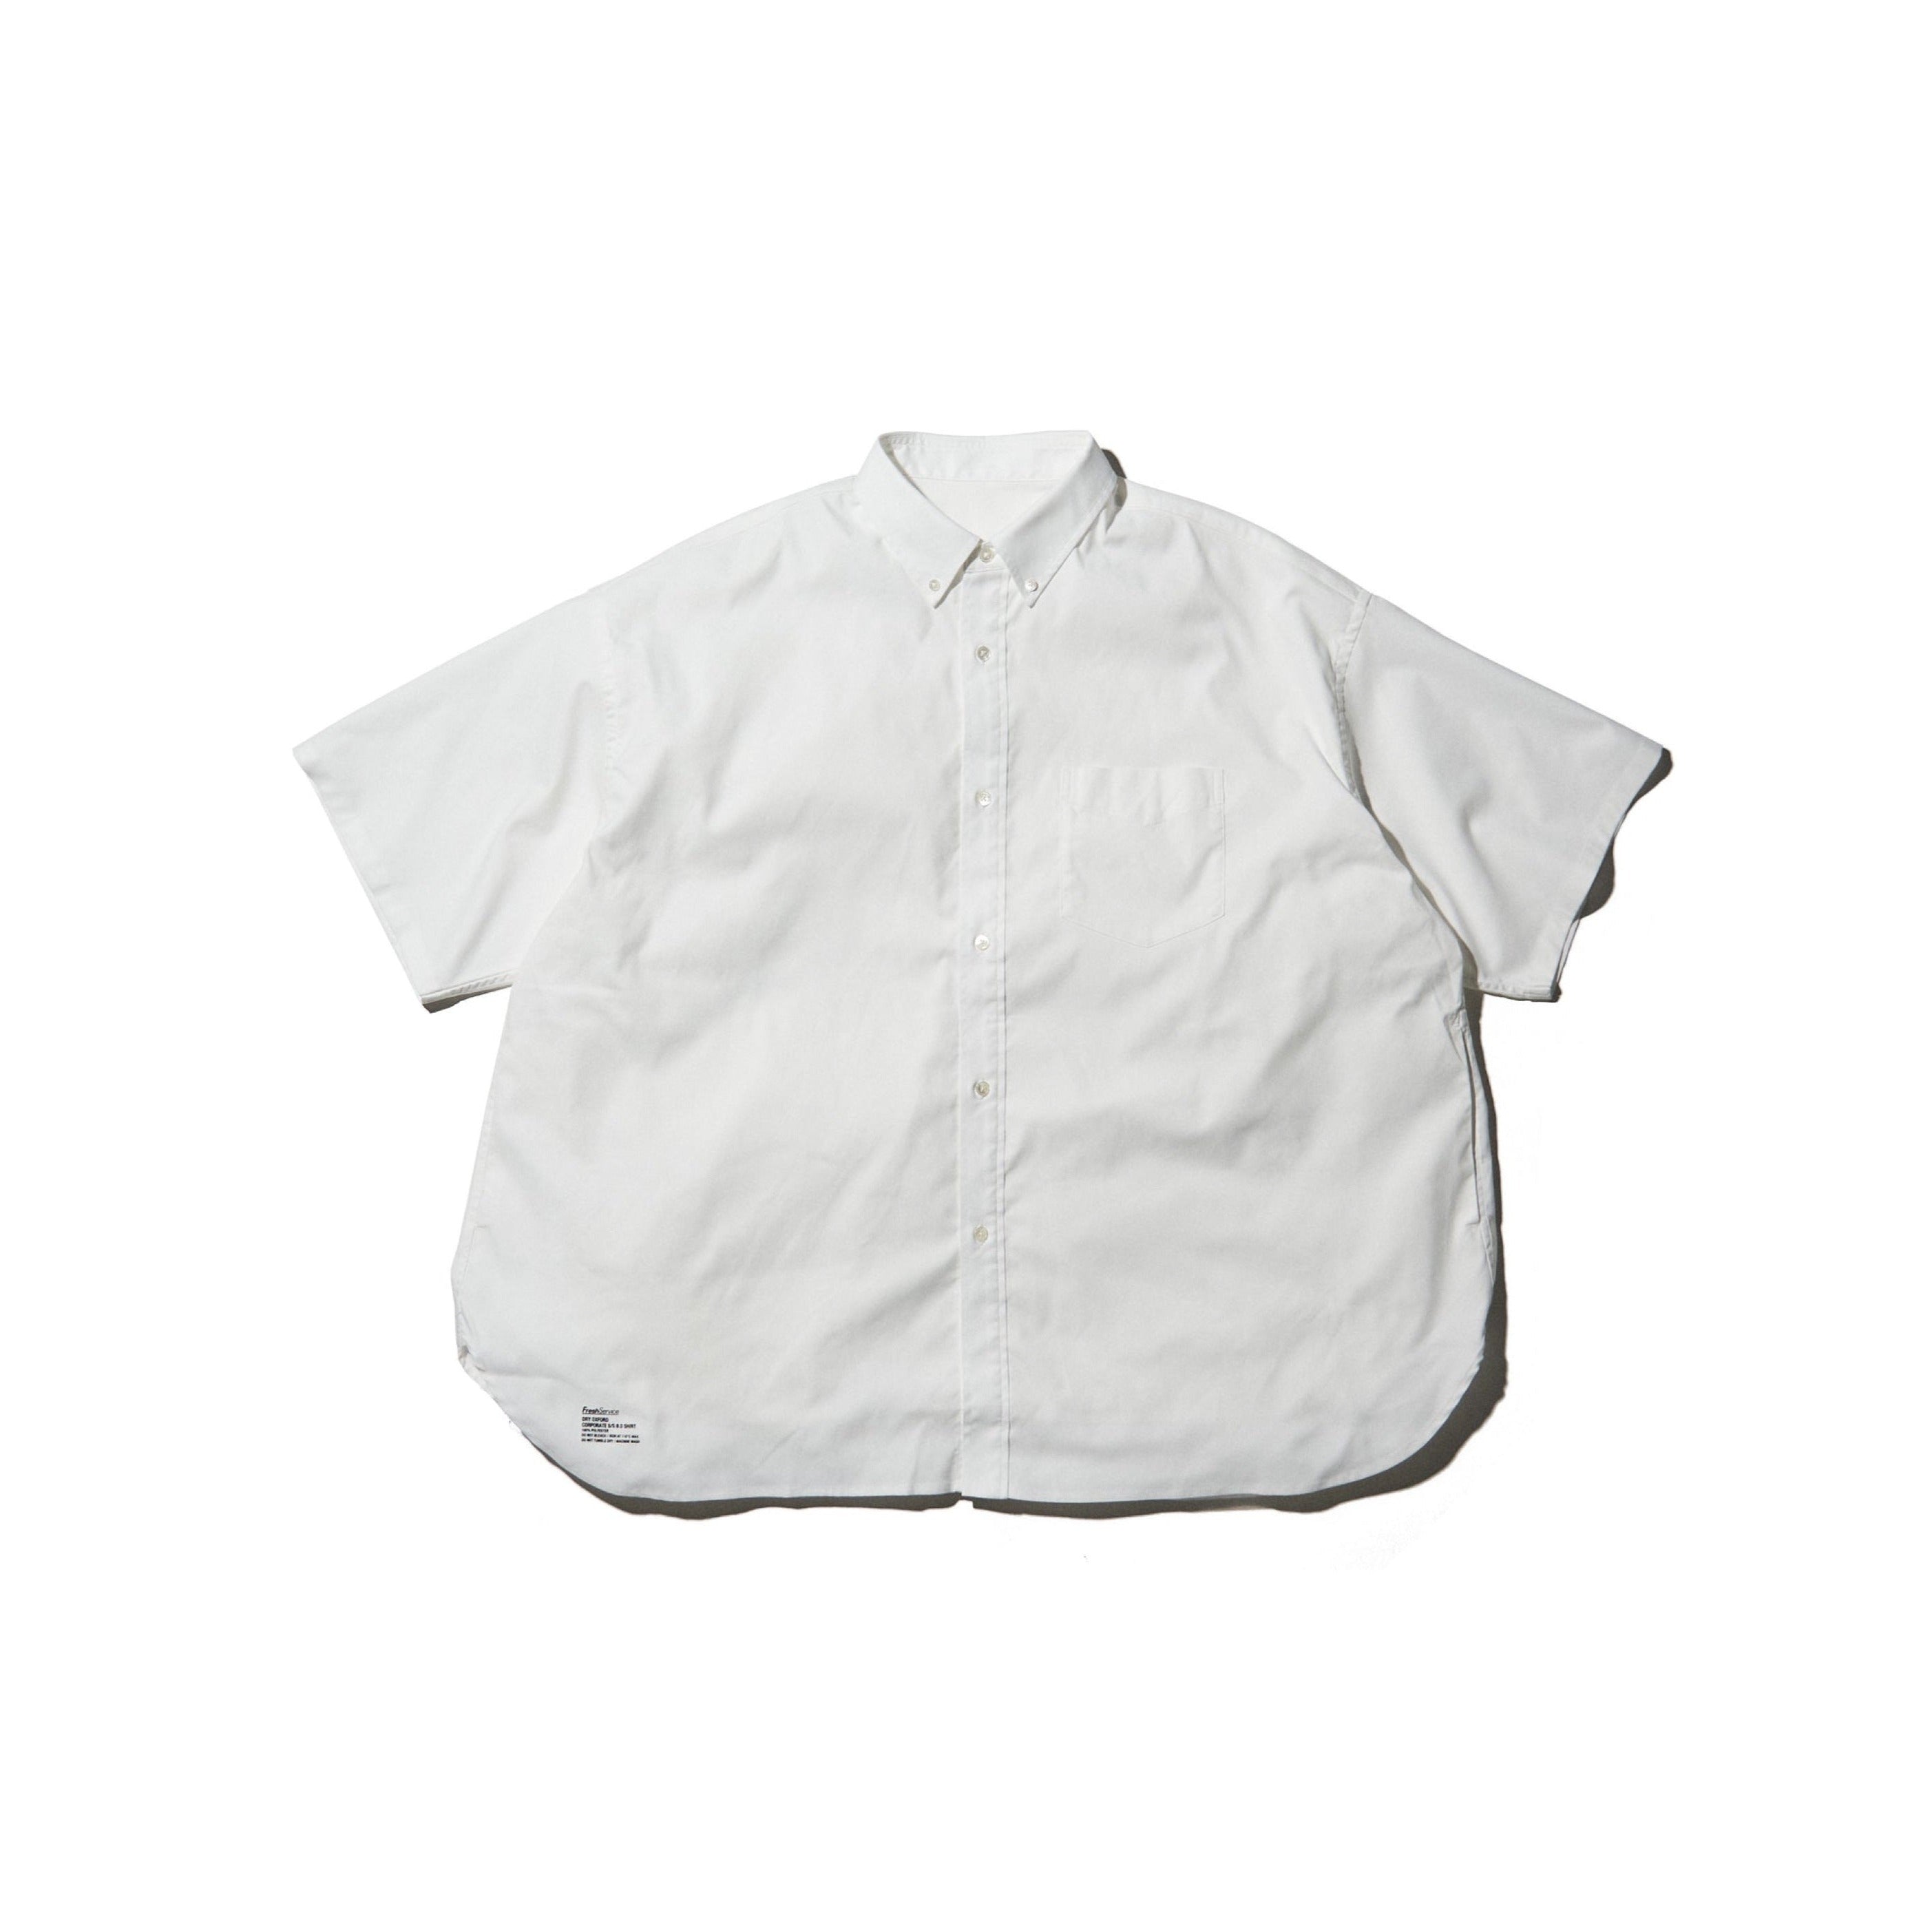 DRY OXFORD CORPORATE S/S B.D. SHIRT – FreshService® official site